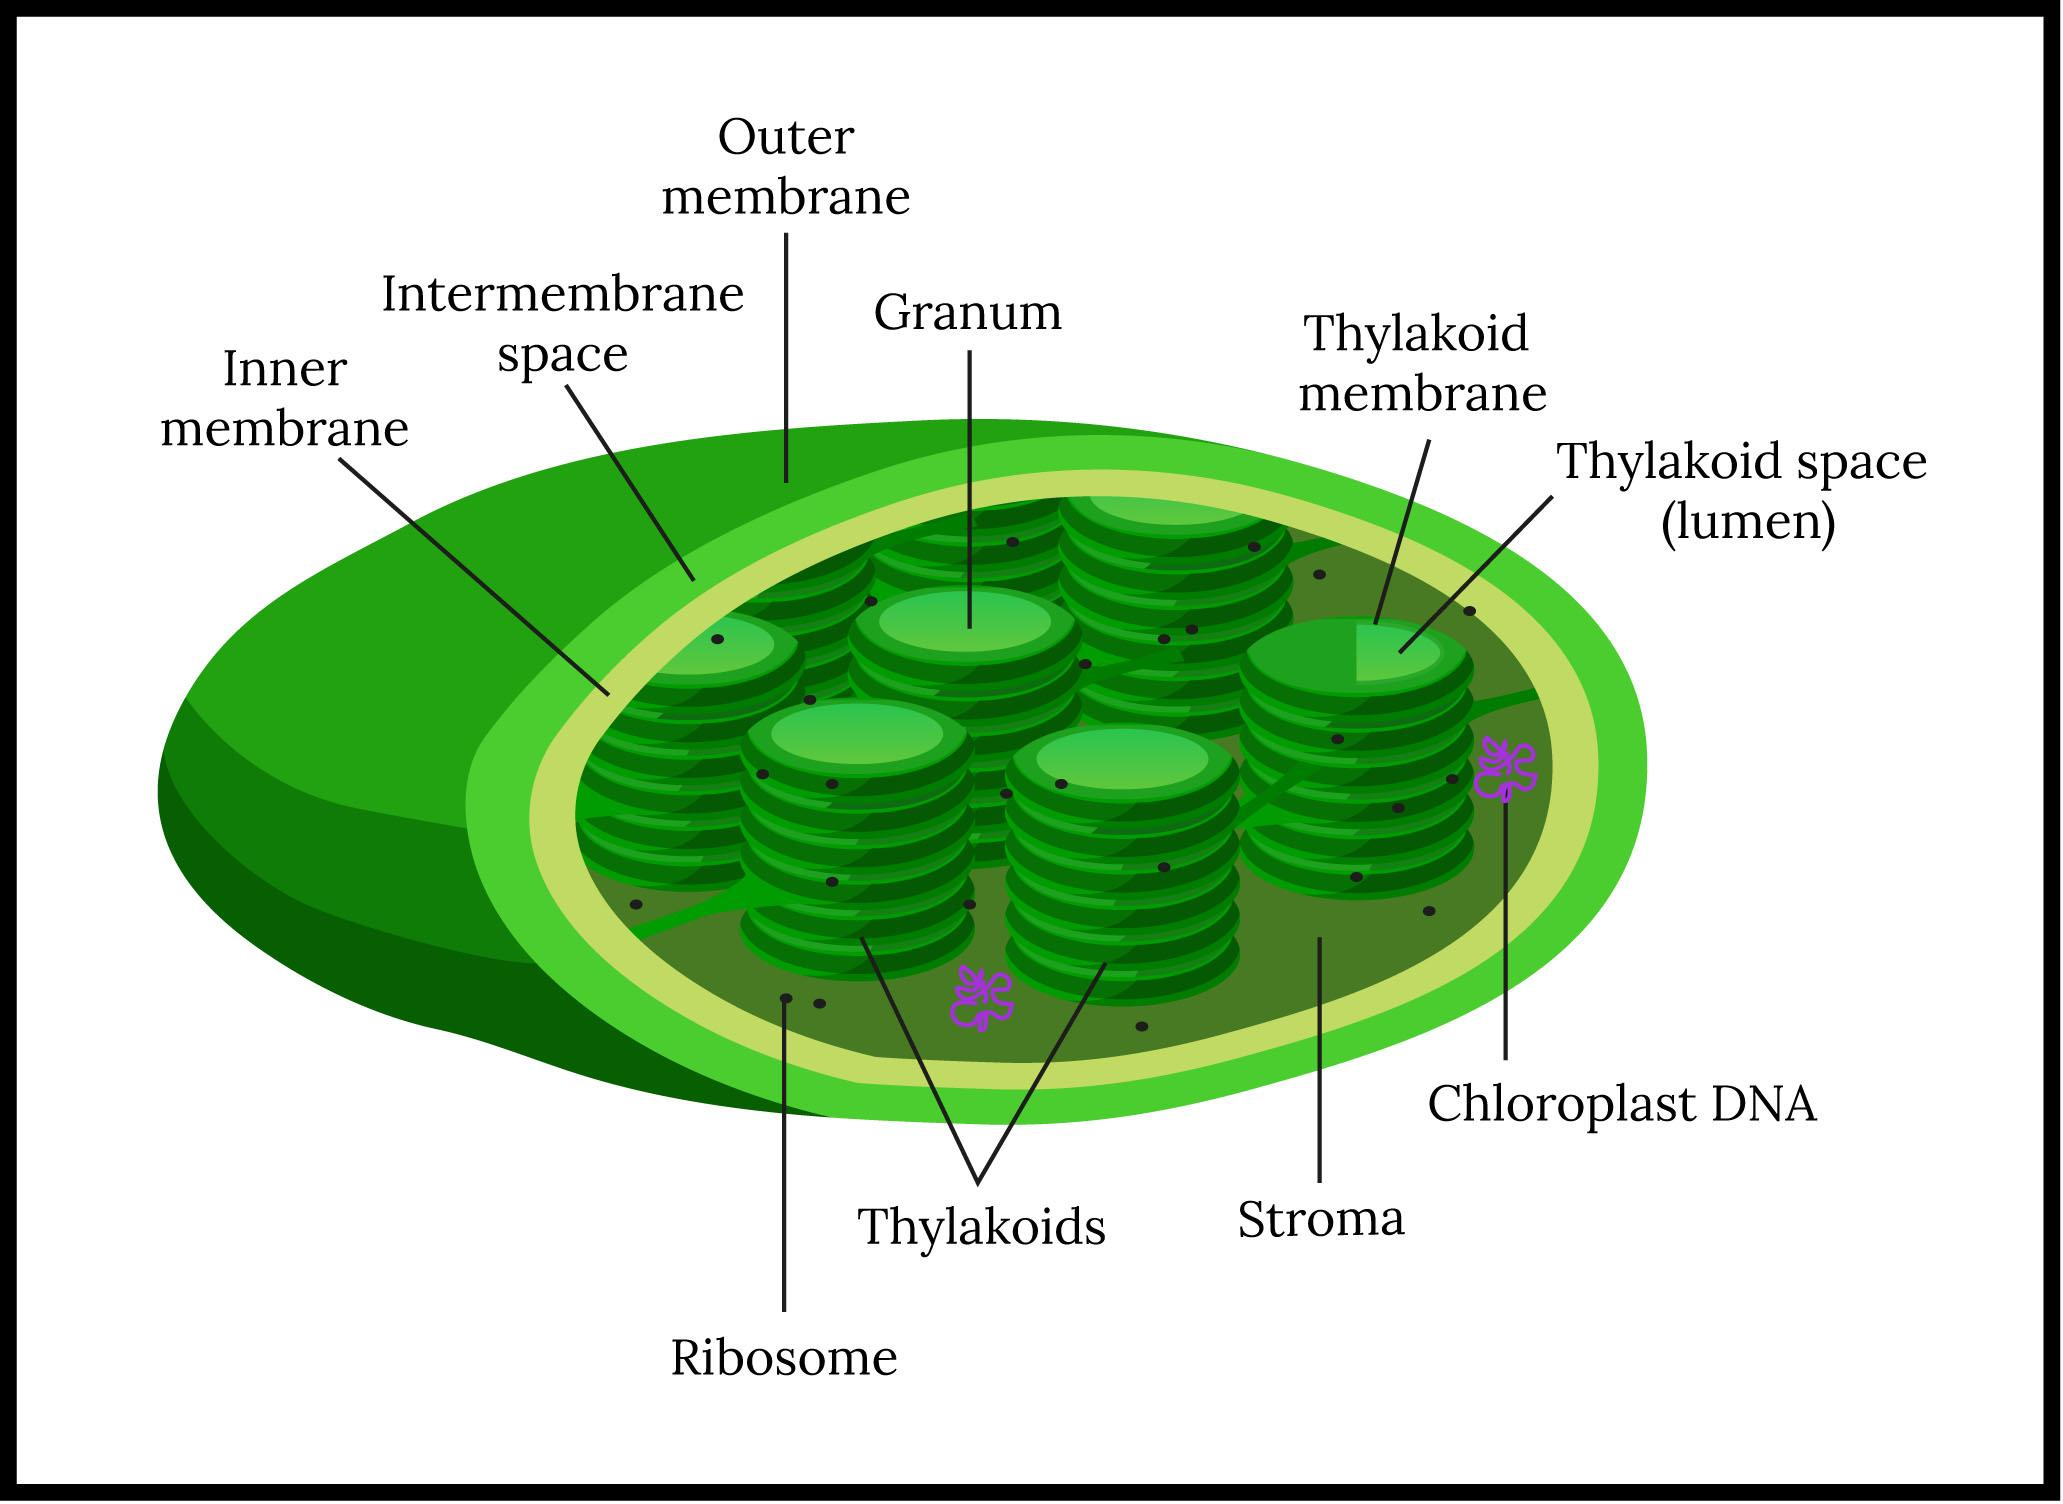 Sketch and label ultrastructure of chloroplast